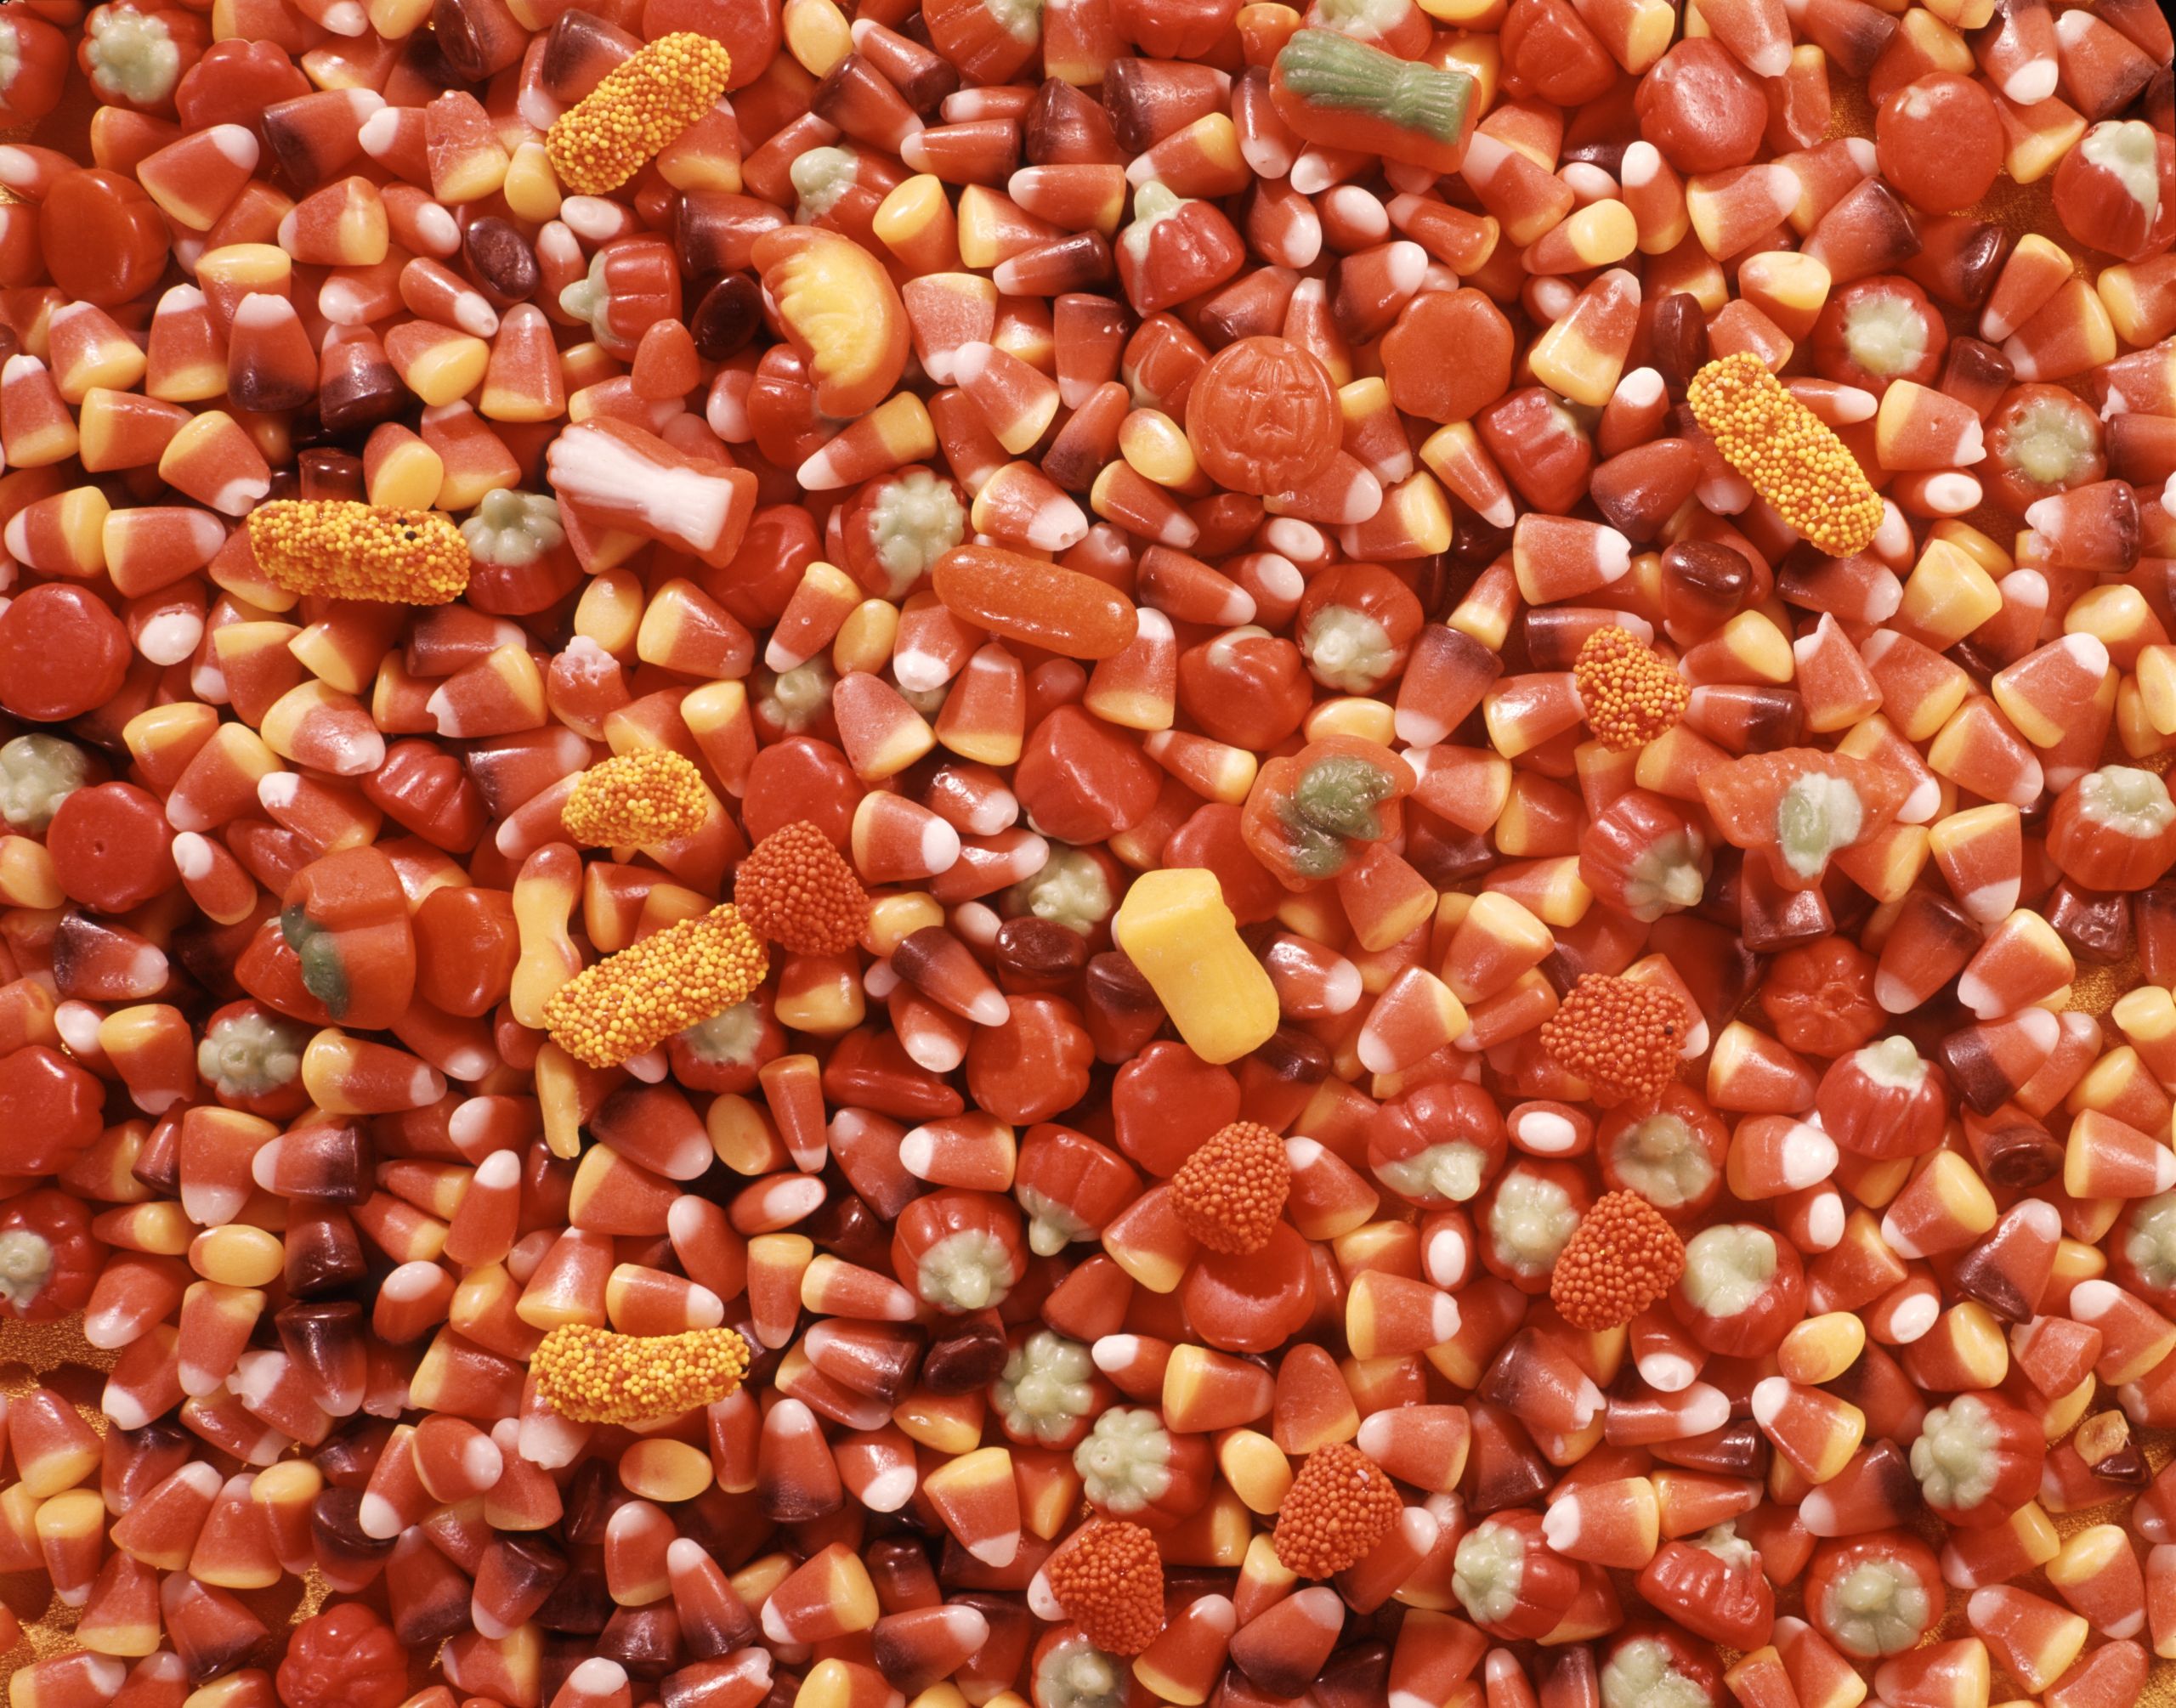 Halloween Candy Corn
 How Americans Became Convinced Their Halloween Candy was